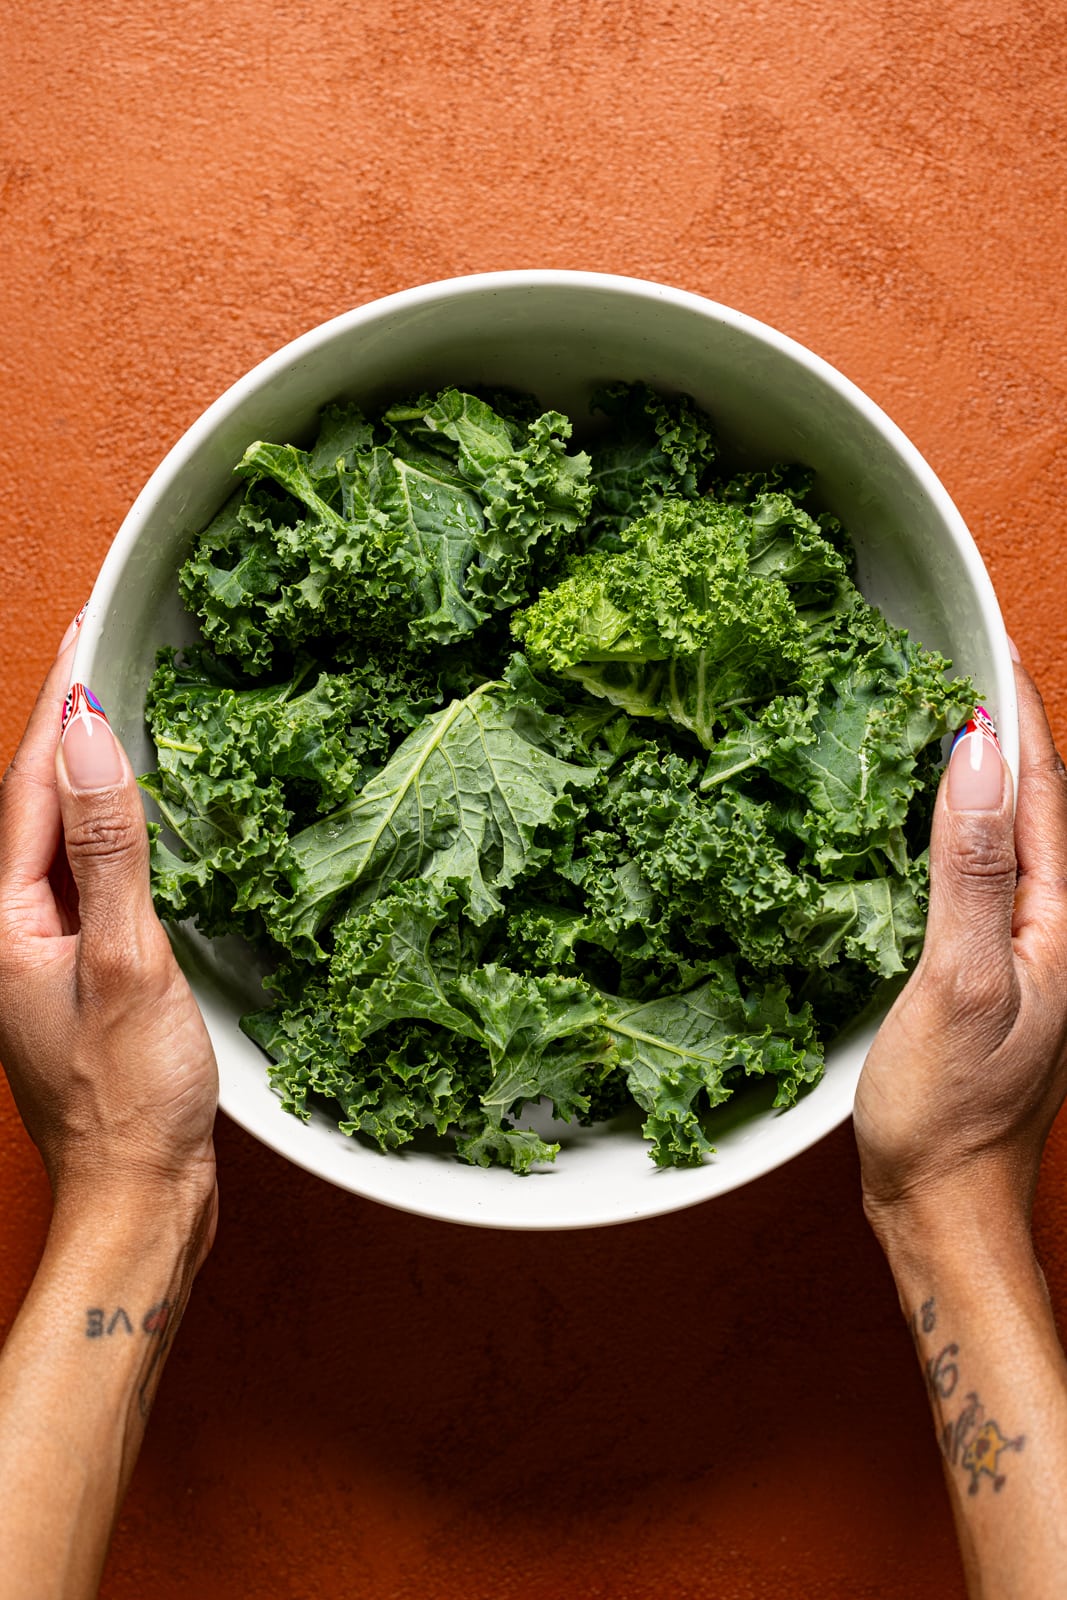 Chopped kale in a white bowl being held.